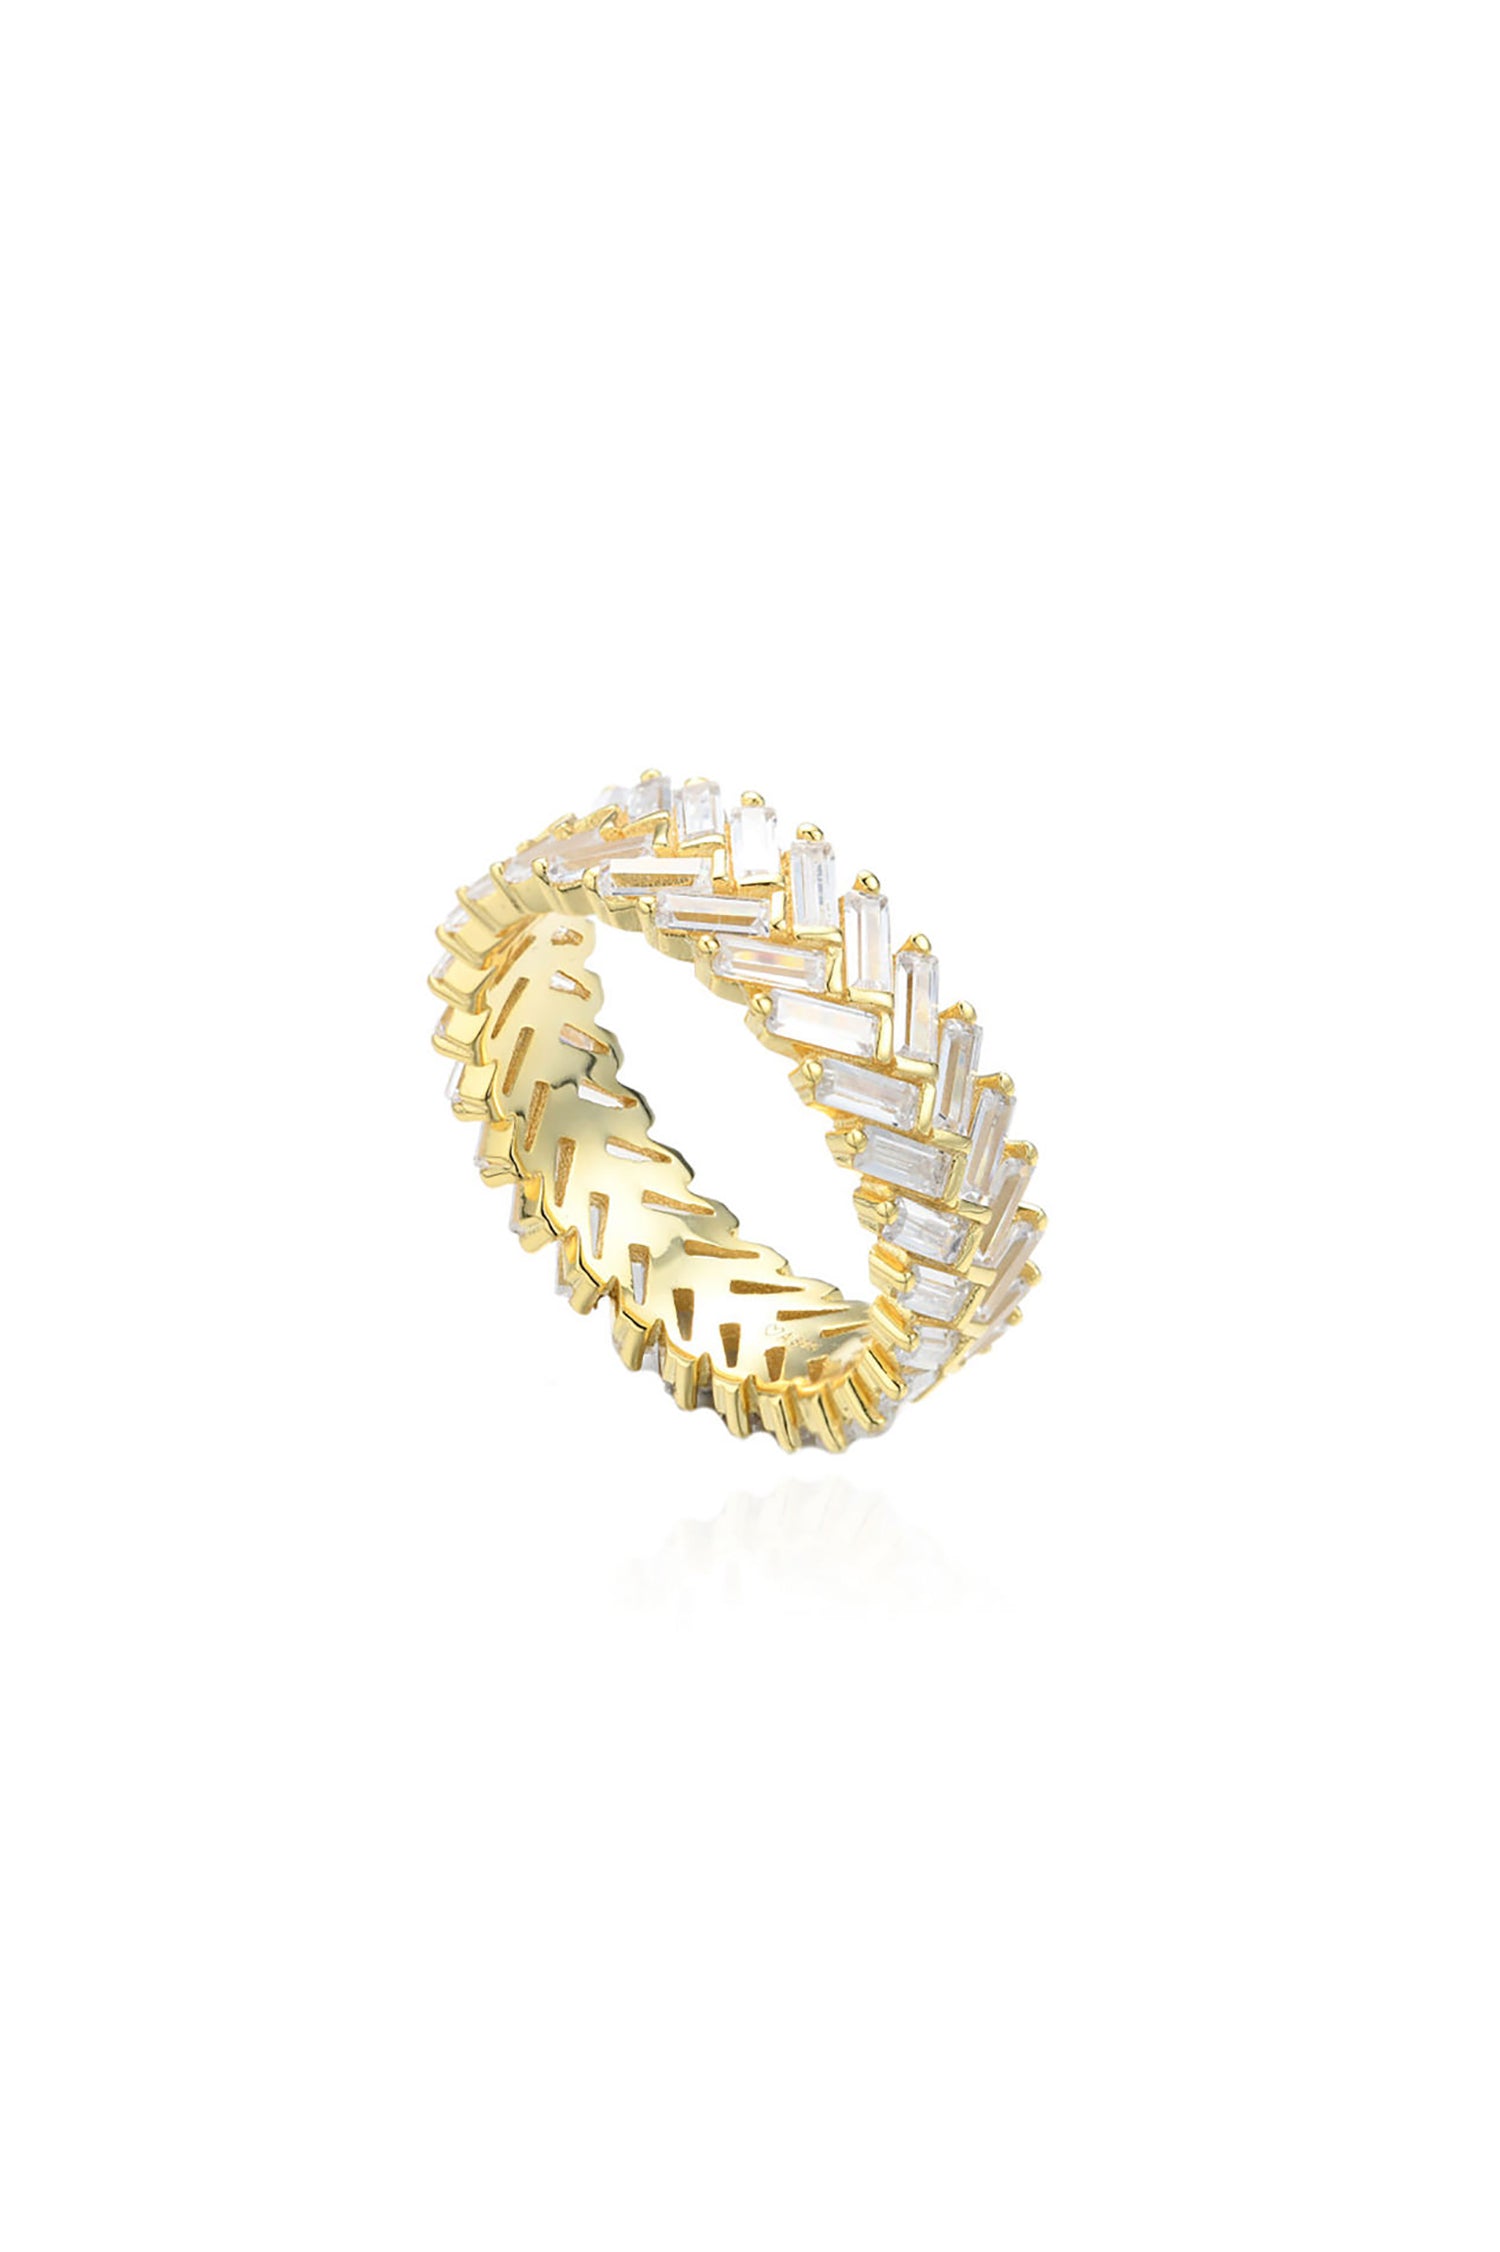  Herringbone Stacking Ring 14k Gold Plated Sterling Silver White Background